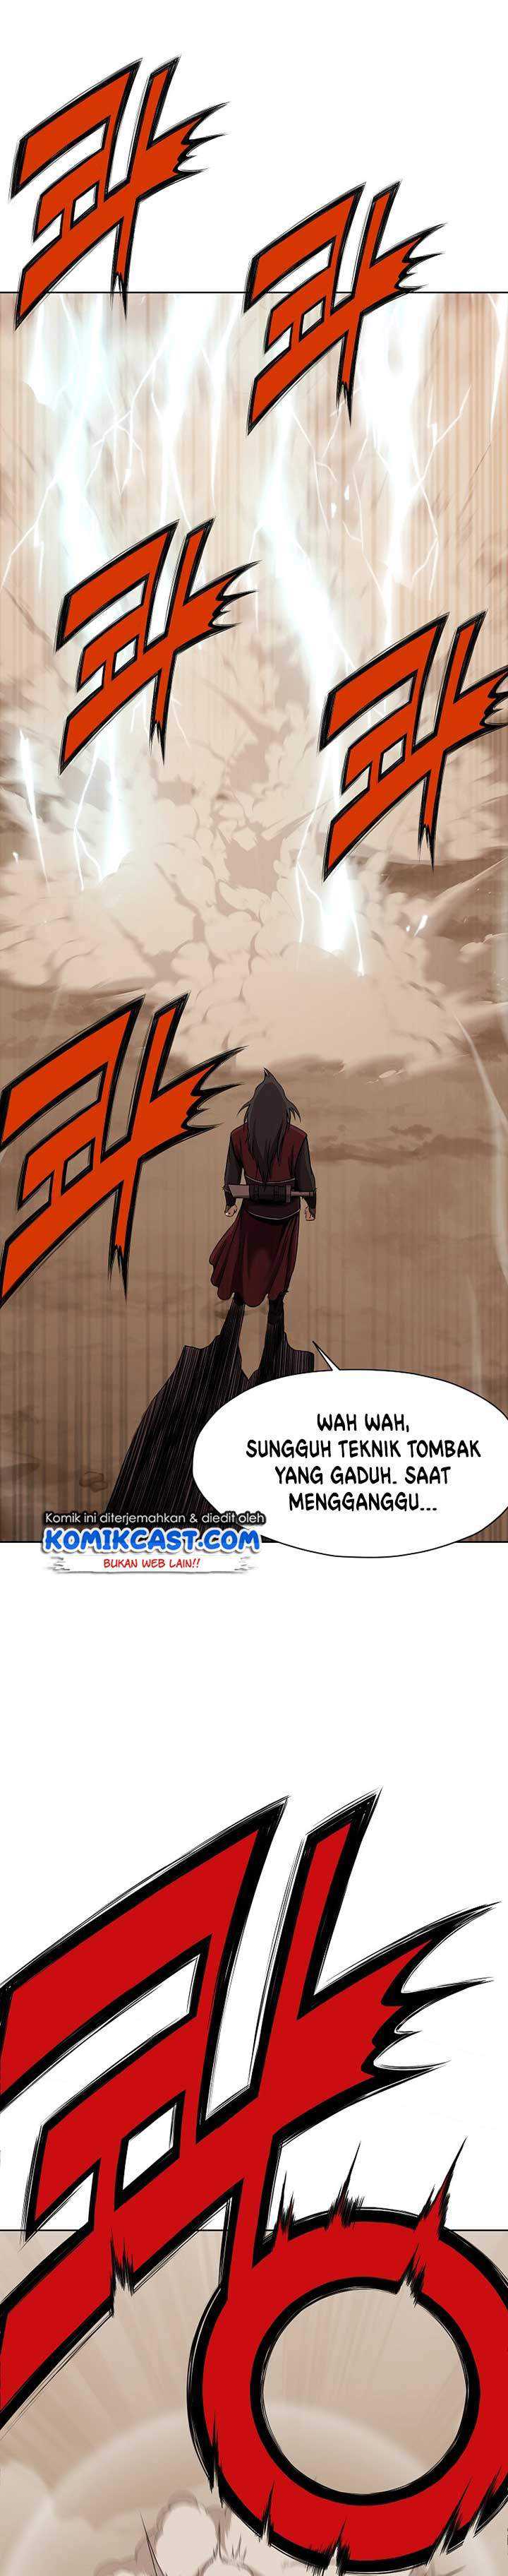 Heavenly Martial God Chapter 01